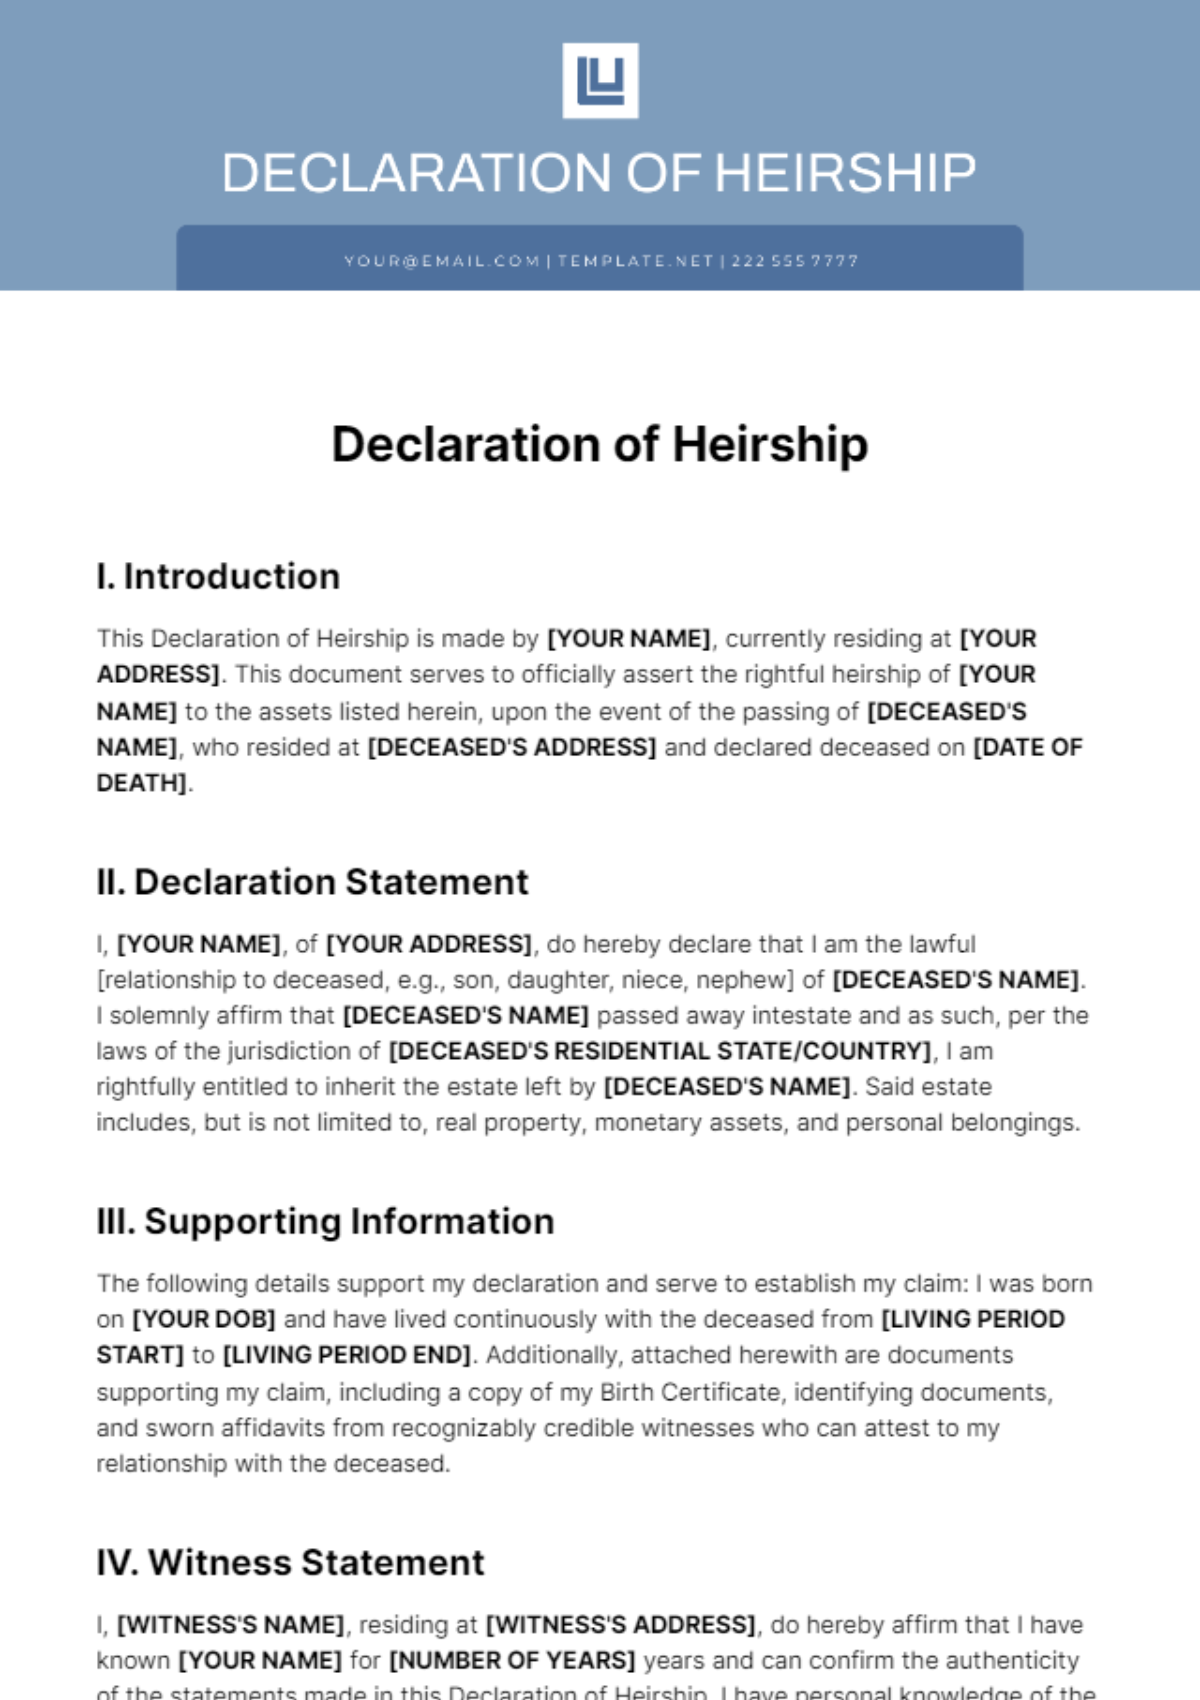 Declaration of Heirship Template